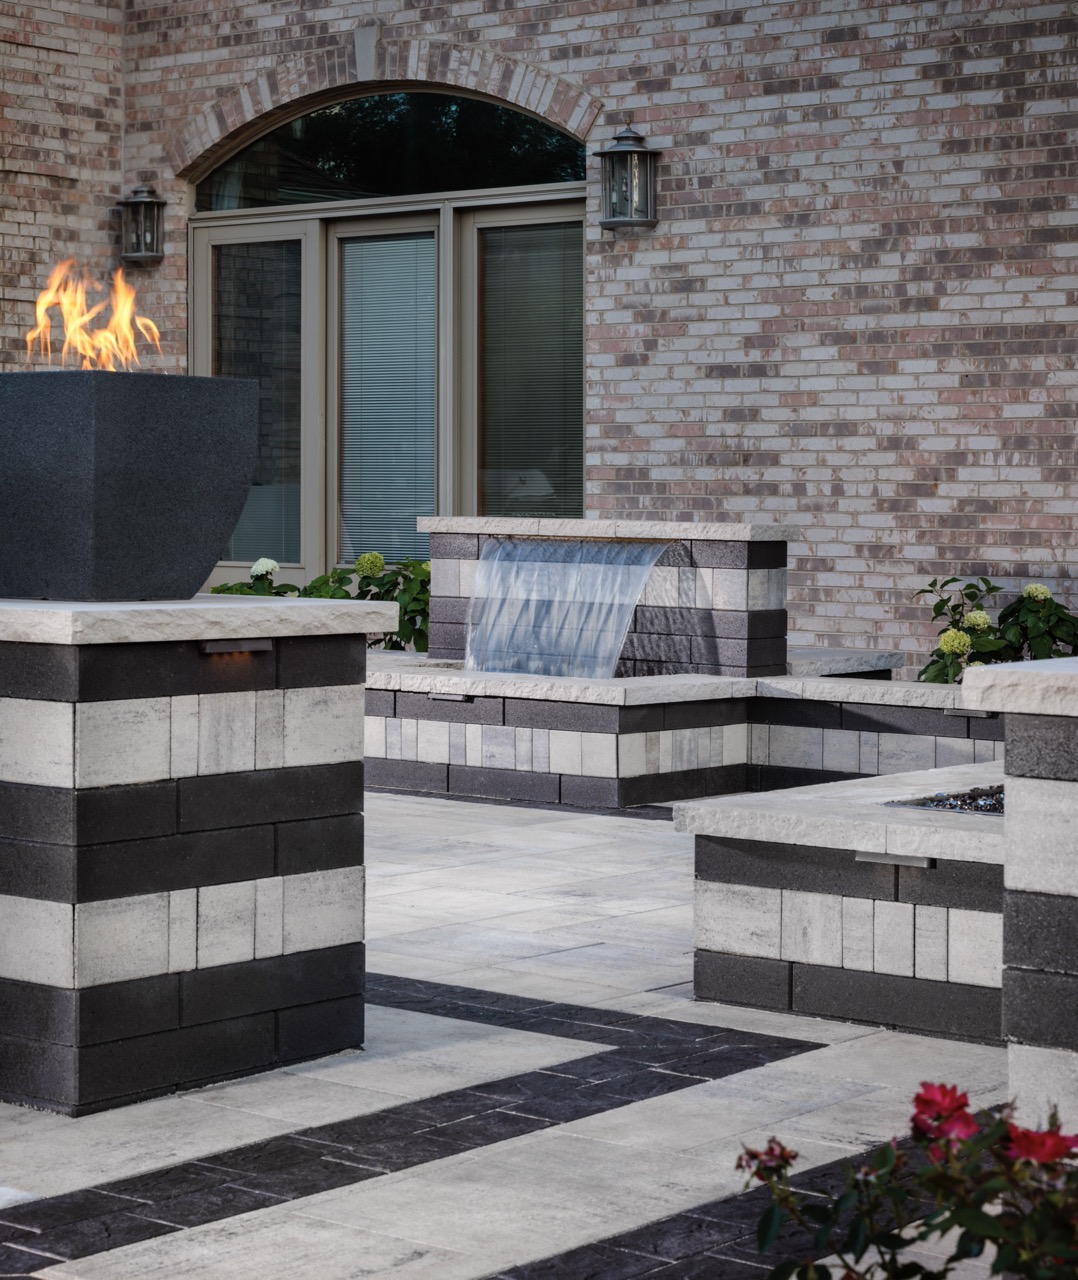 Material Use: Emphasizing Color and Texture with Hardscapes